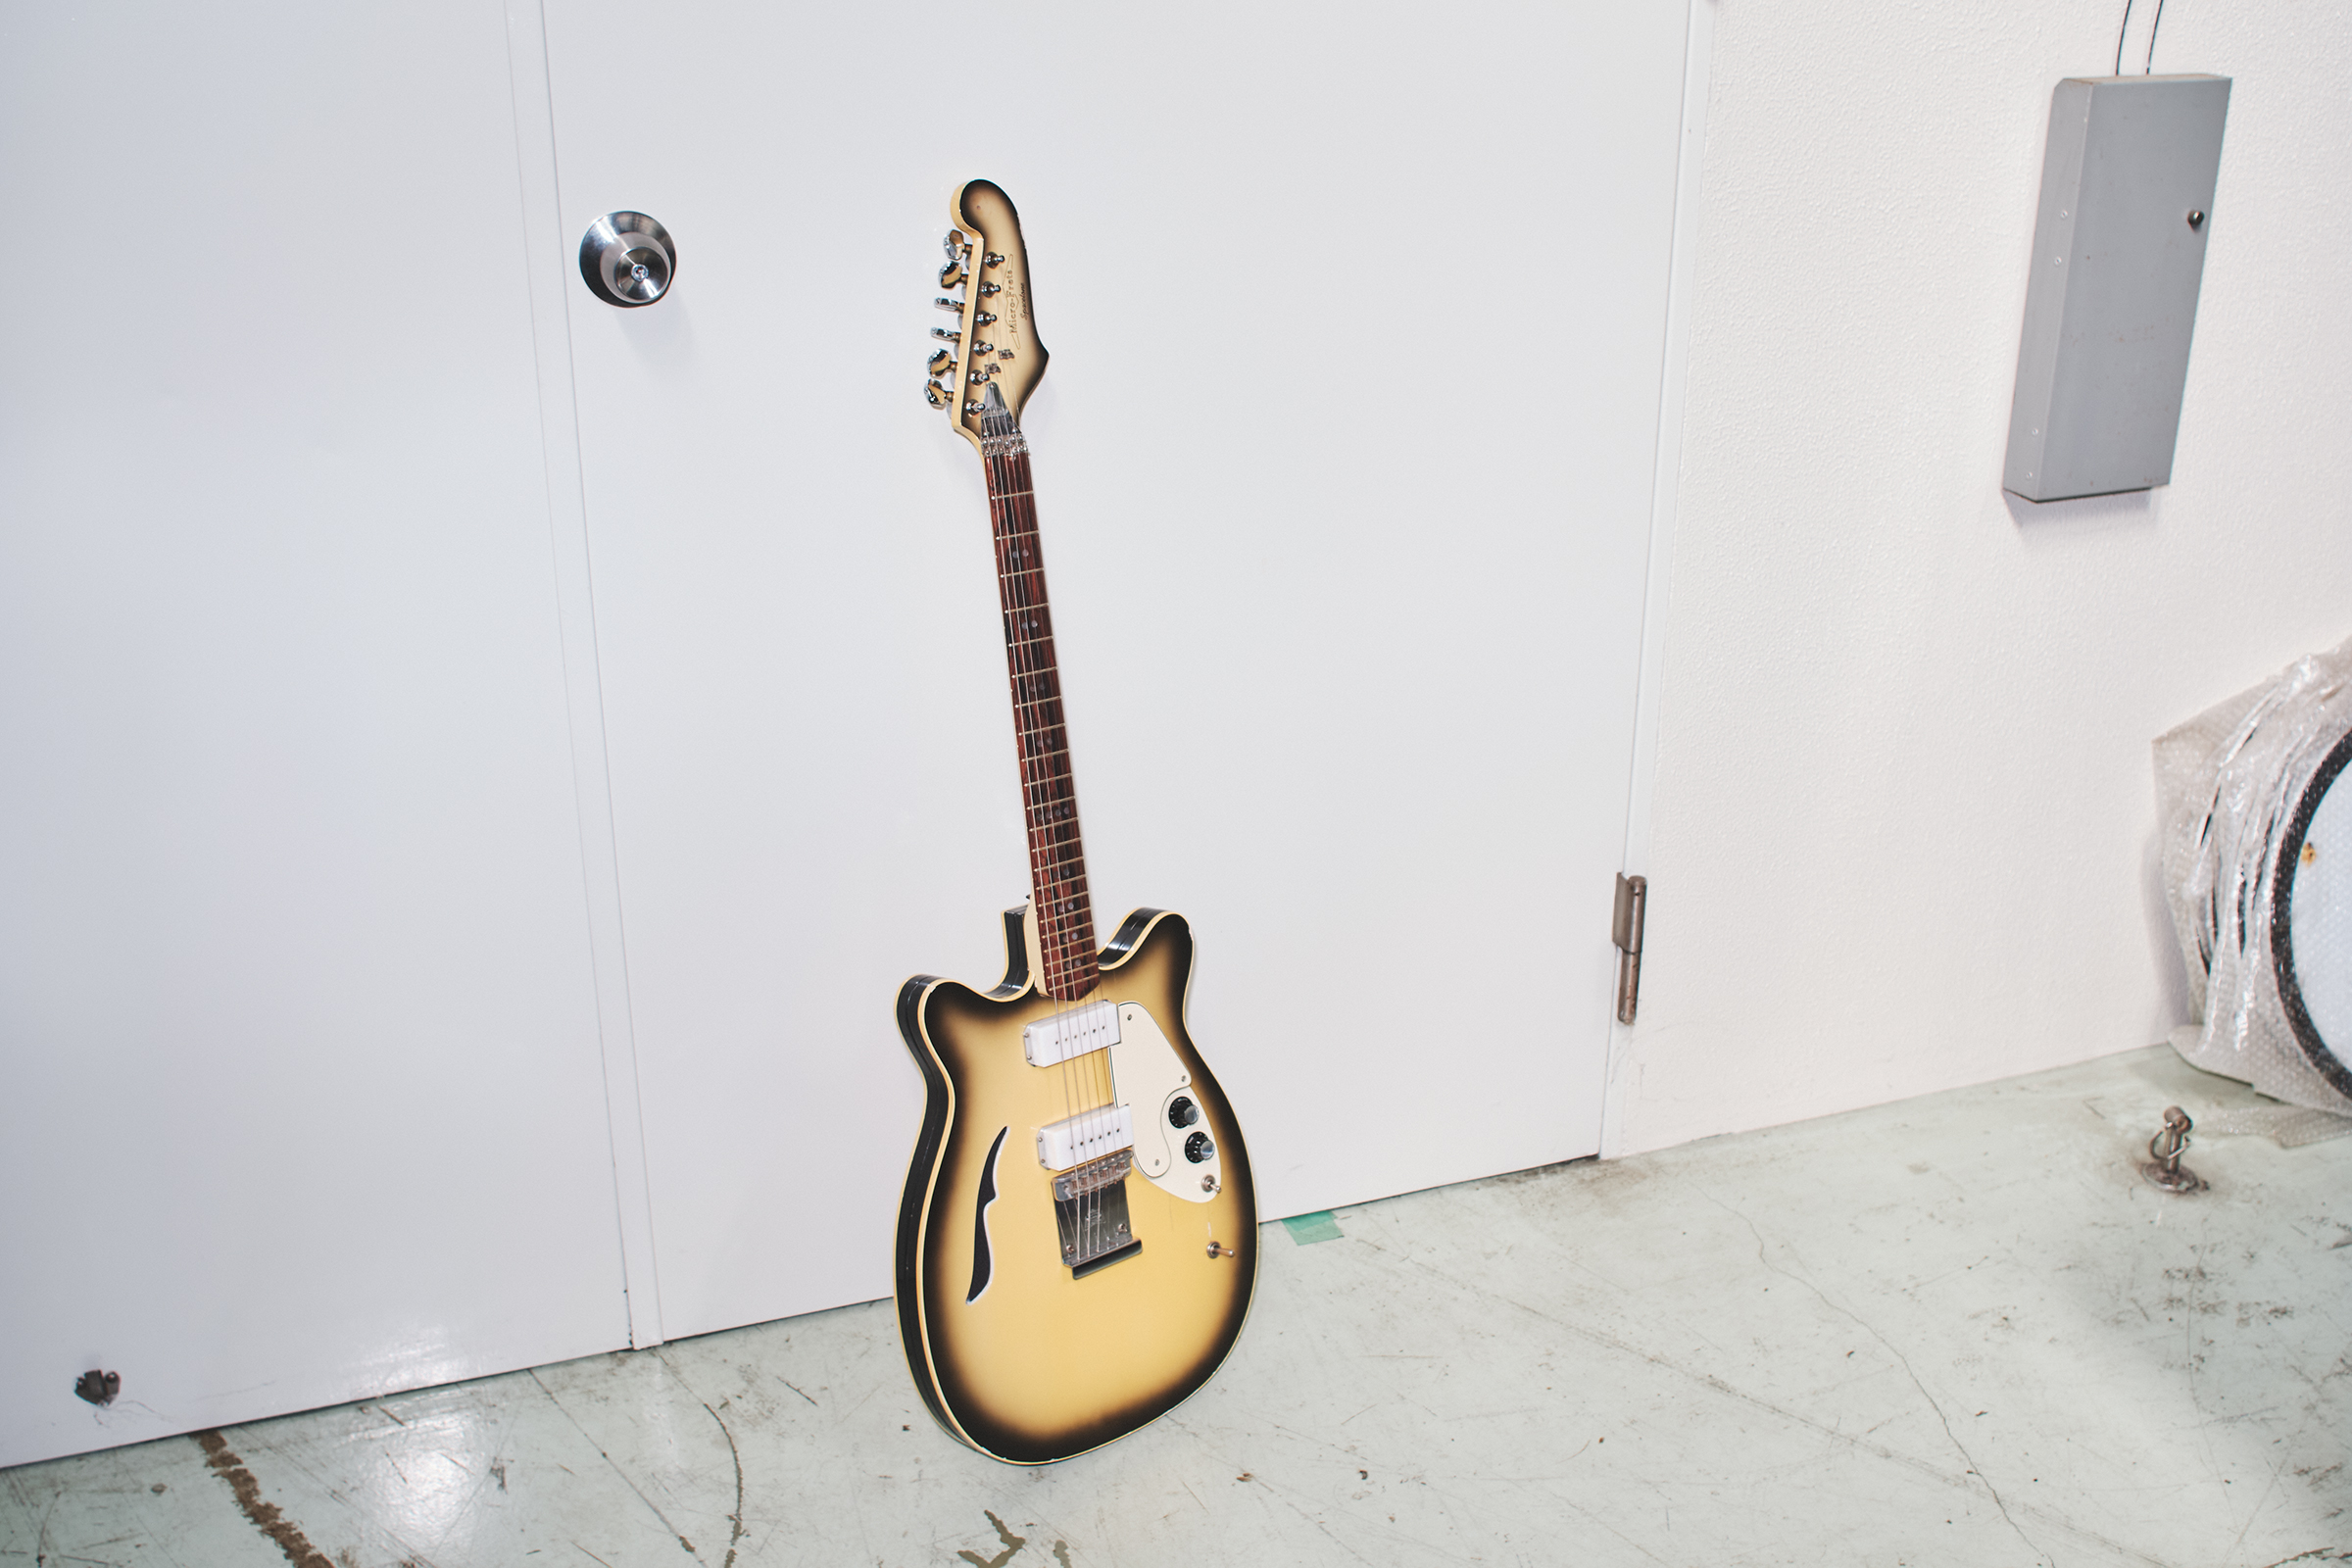 The electric guitar is a 1970s Micro-Frets Spacetone